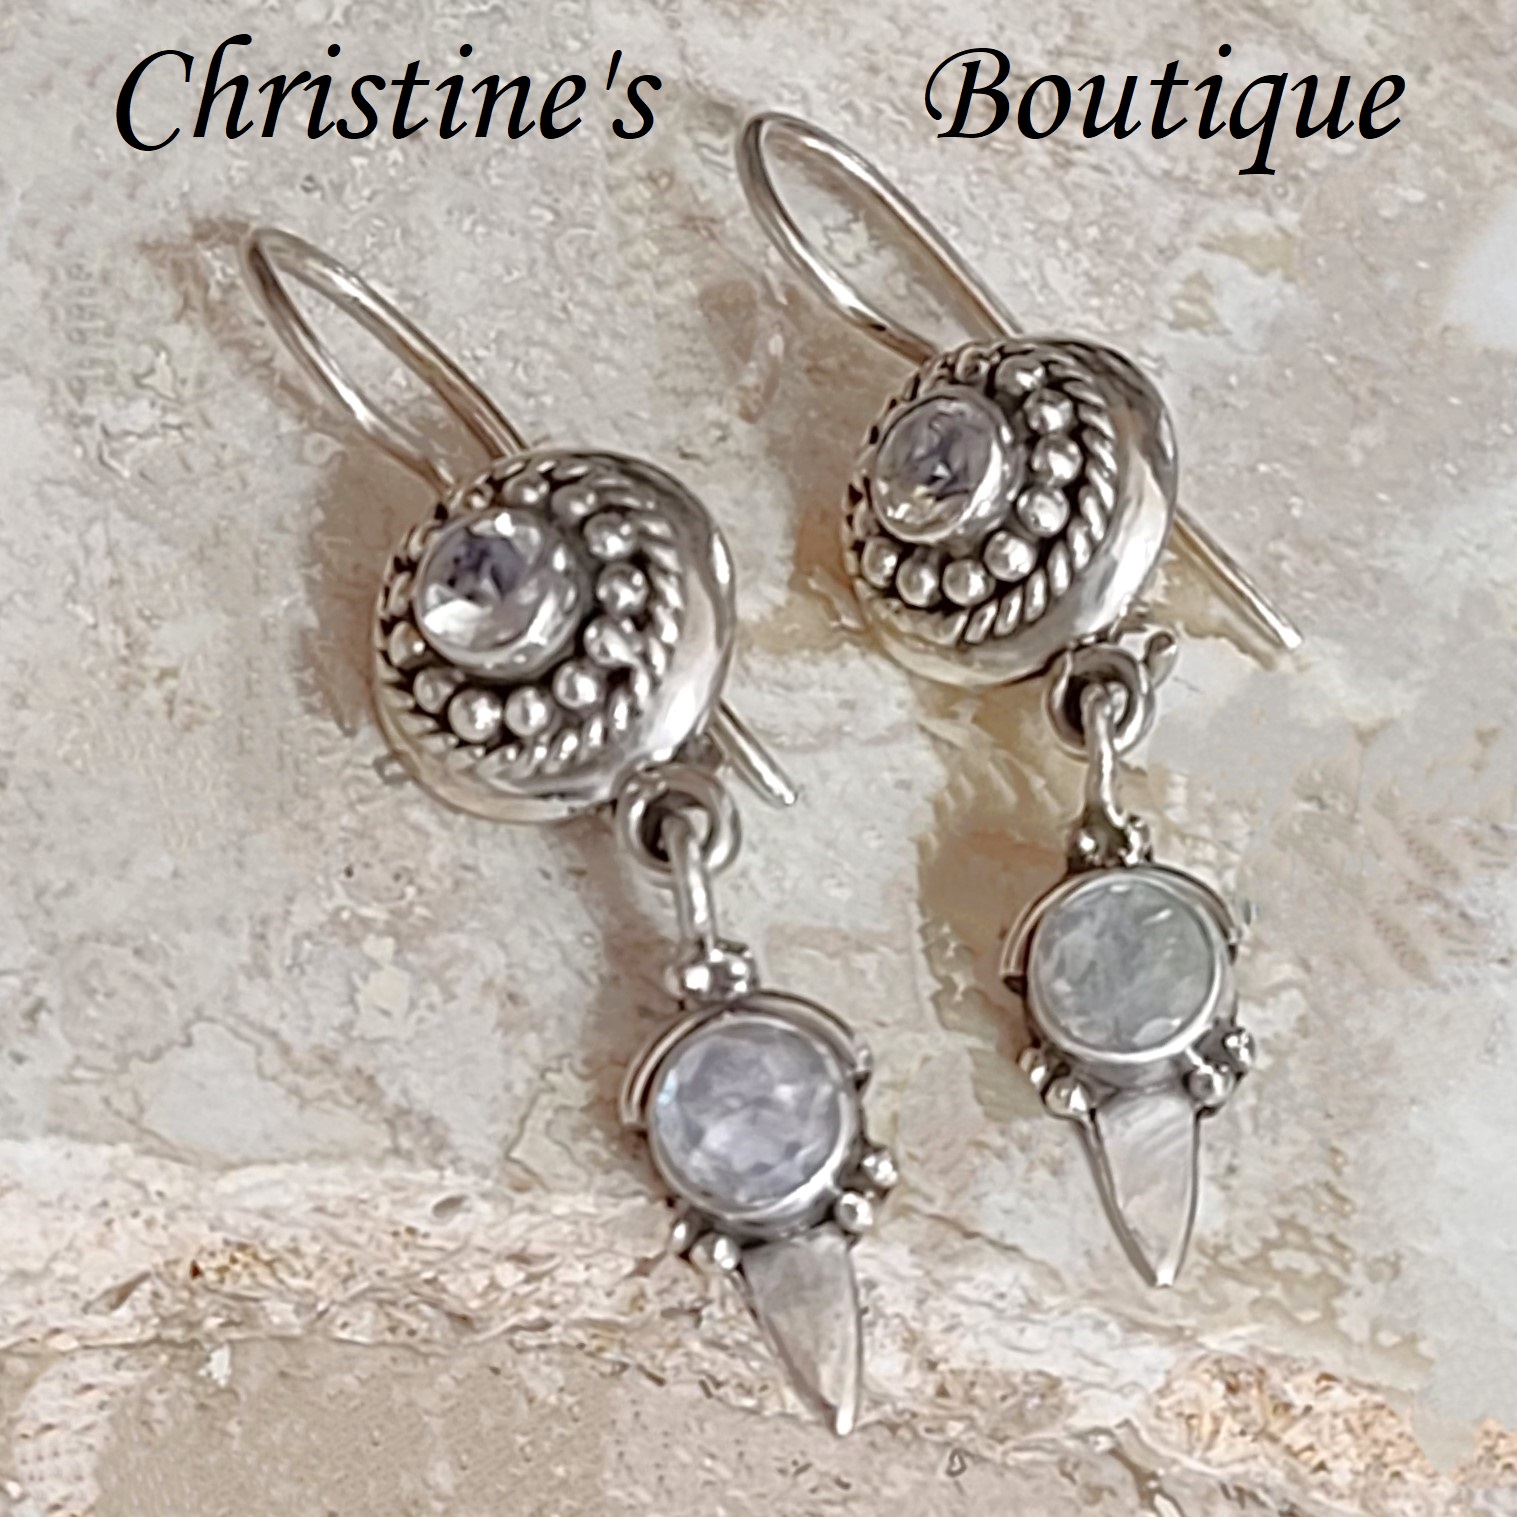 Moonstone earrings, with 925 sterling silver setting,